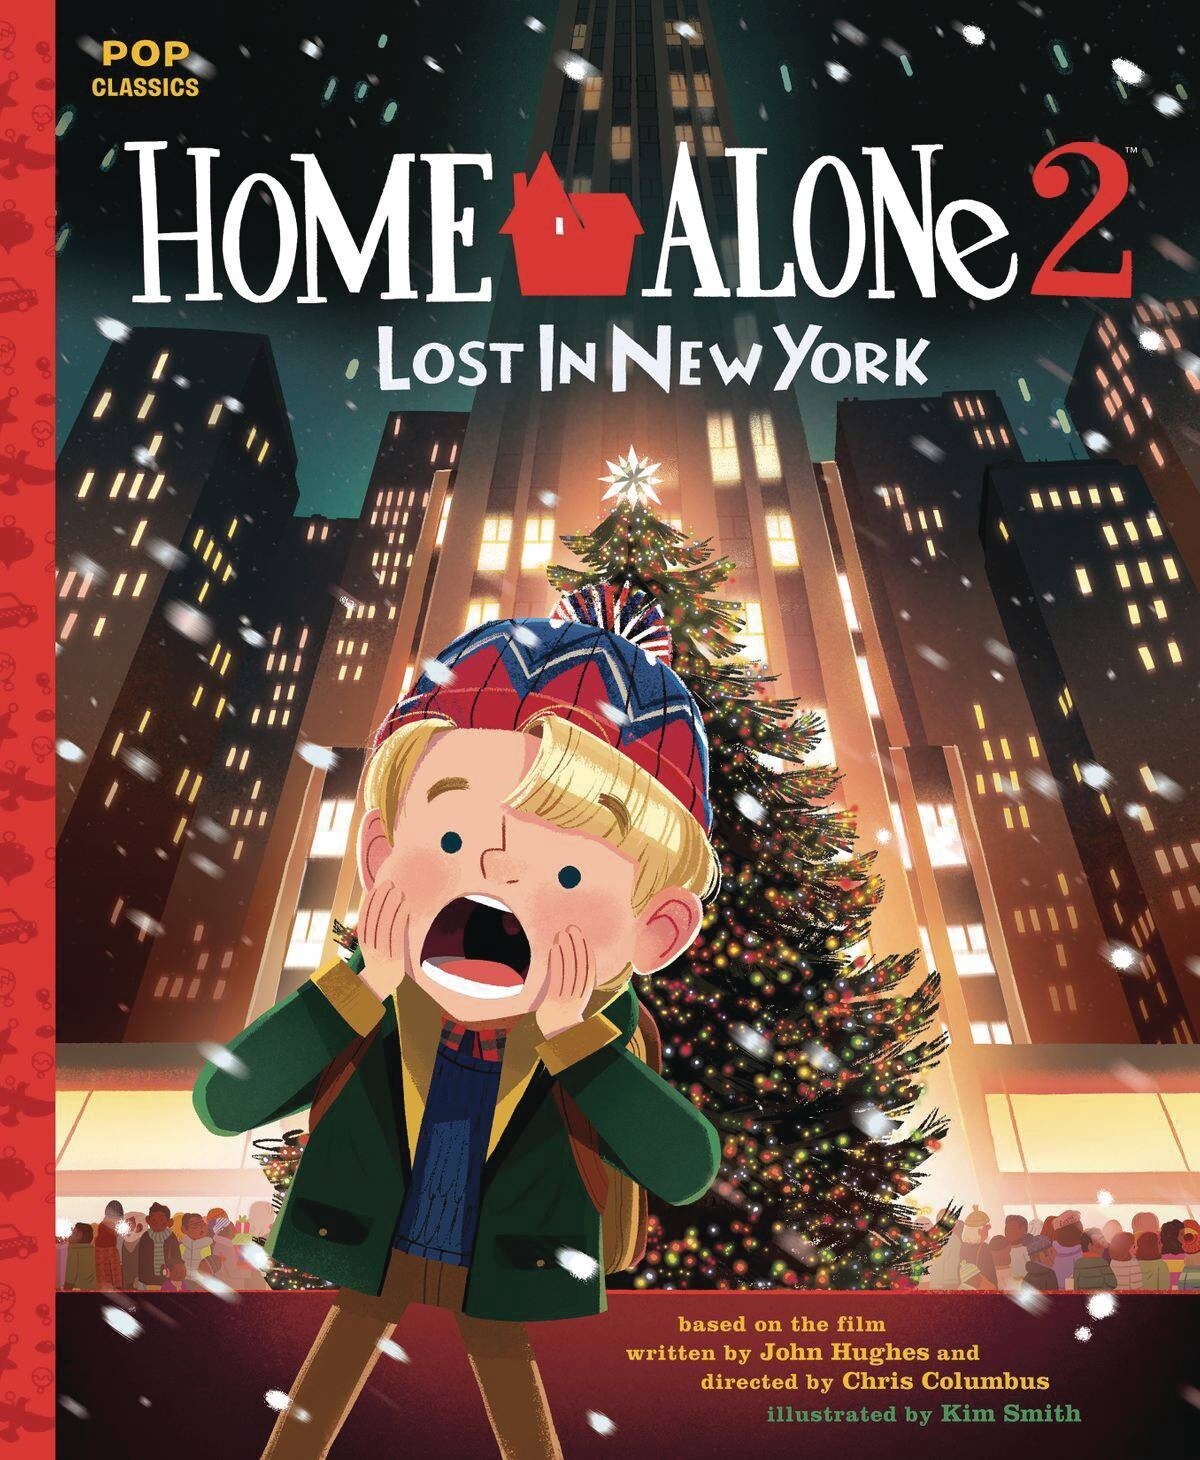 Home Alone 2: Lost In New York: Pop Classic Illustrated Storybook